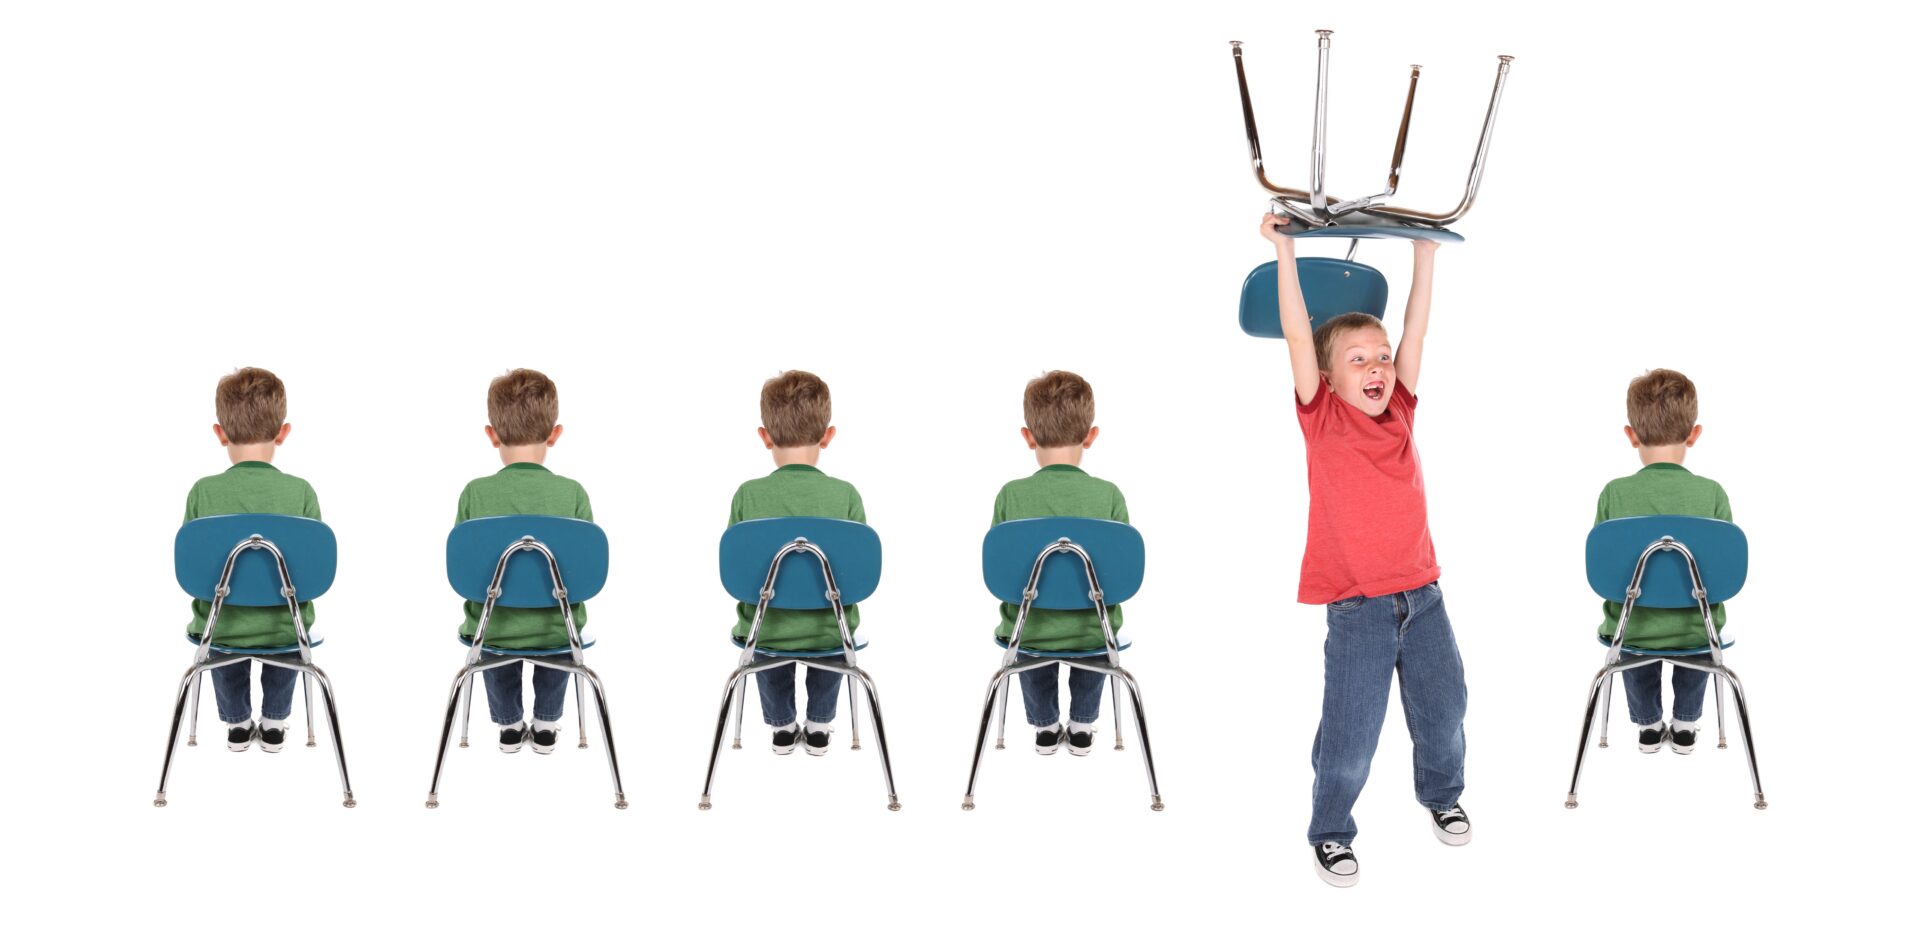 Five students sitting in chairs calmly and one student misbehaving